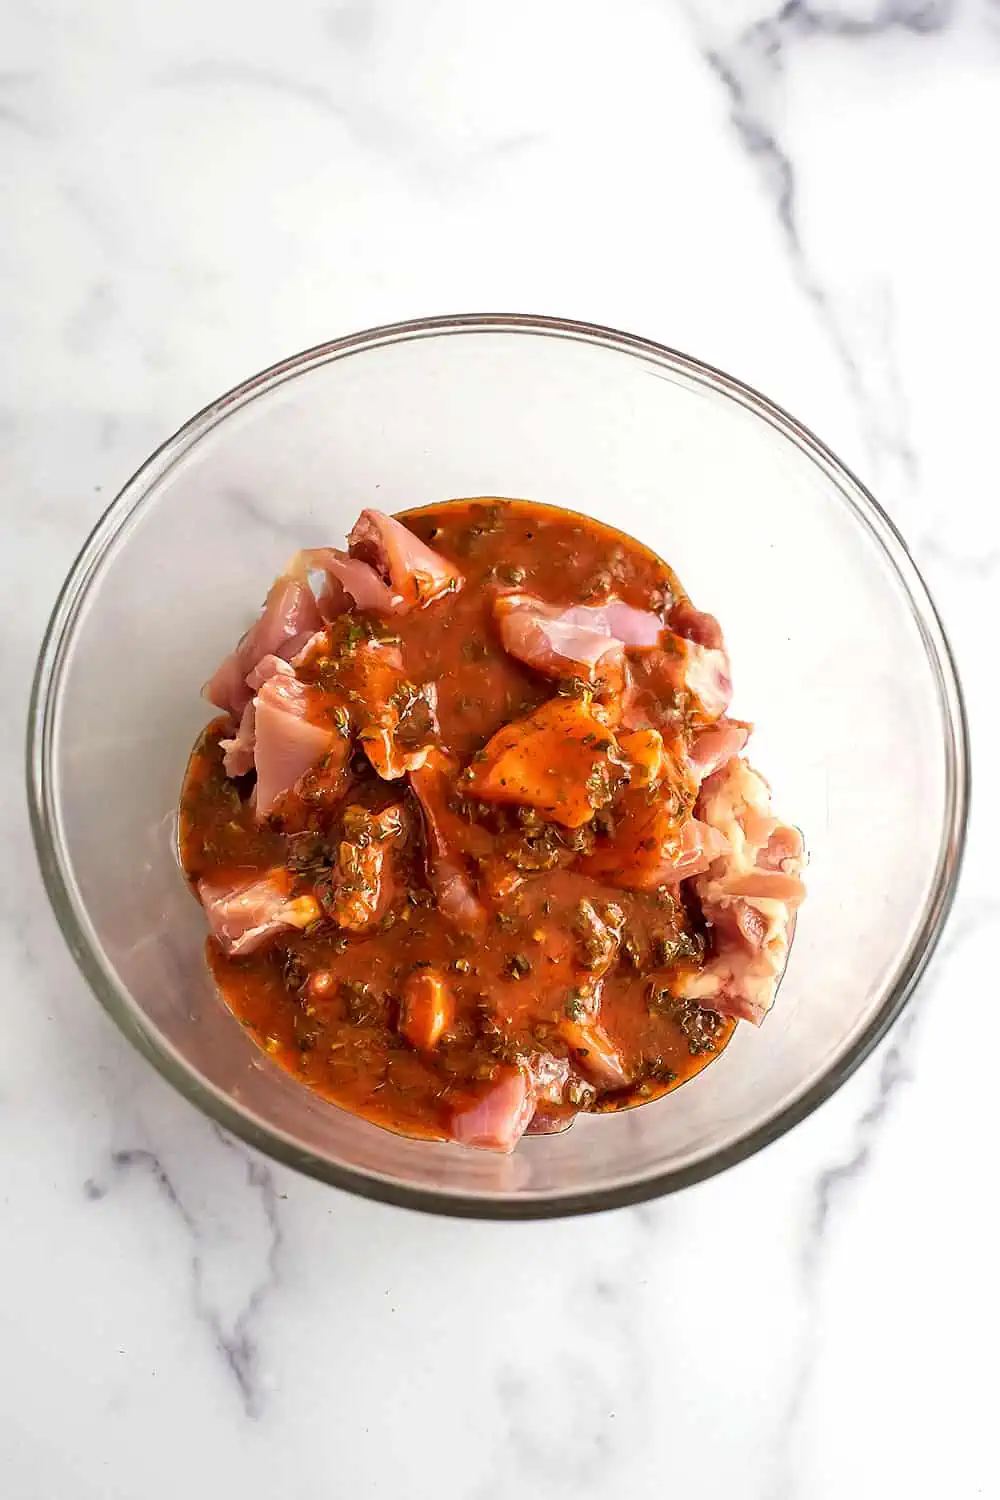 Raw chicken cubes in glass bowl with buffalo sauce poured over top.